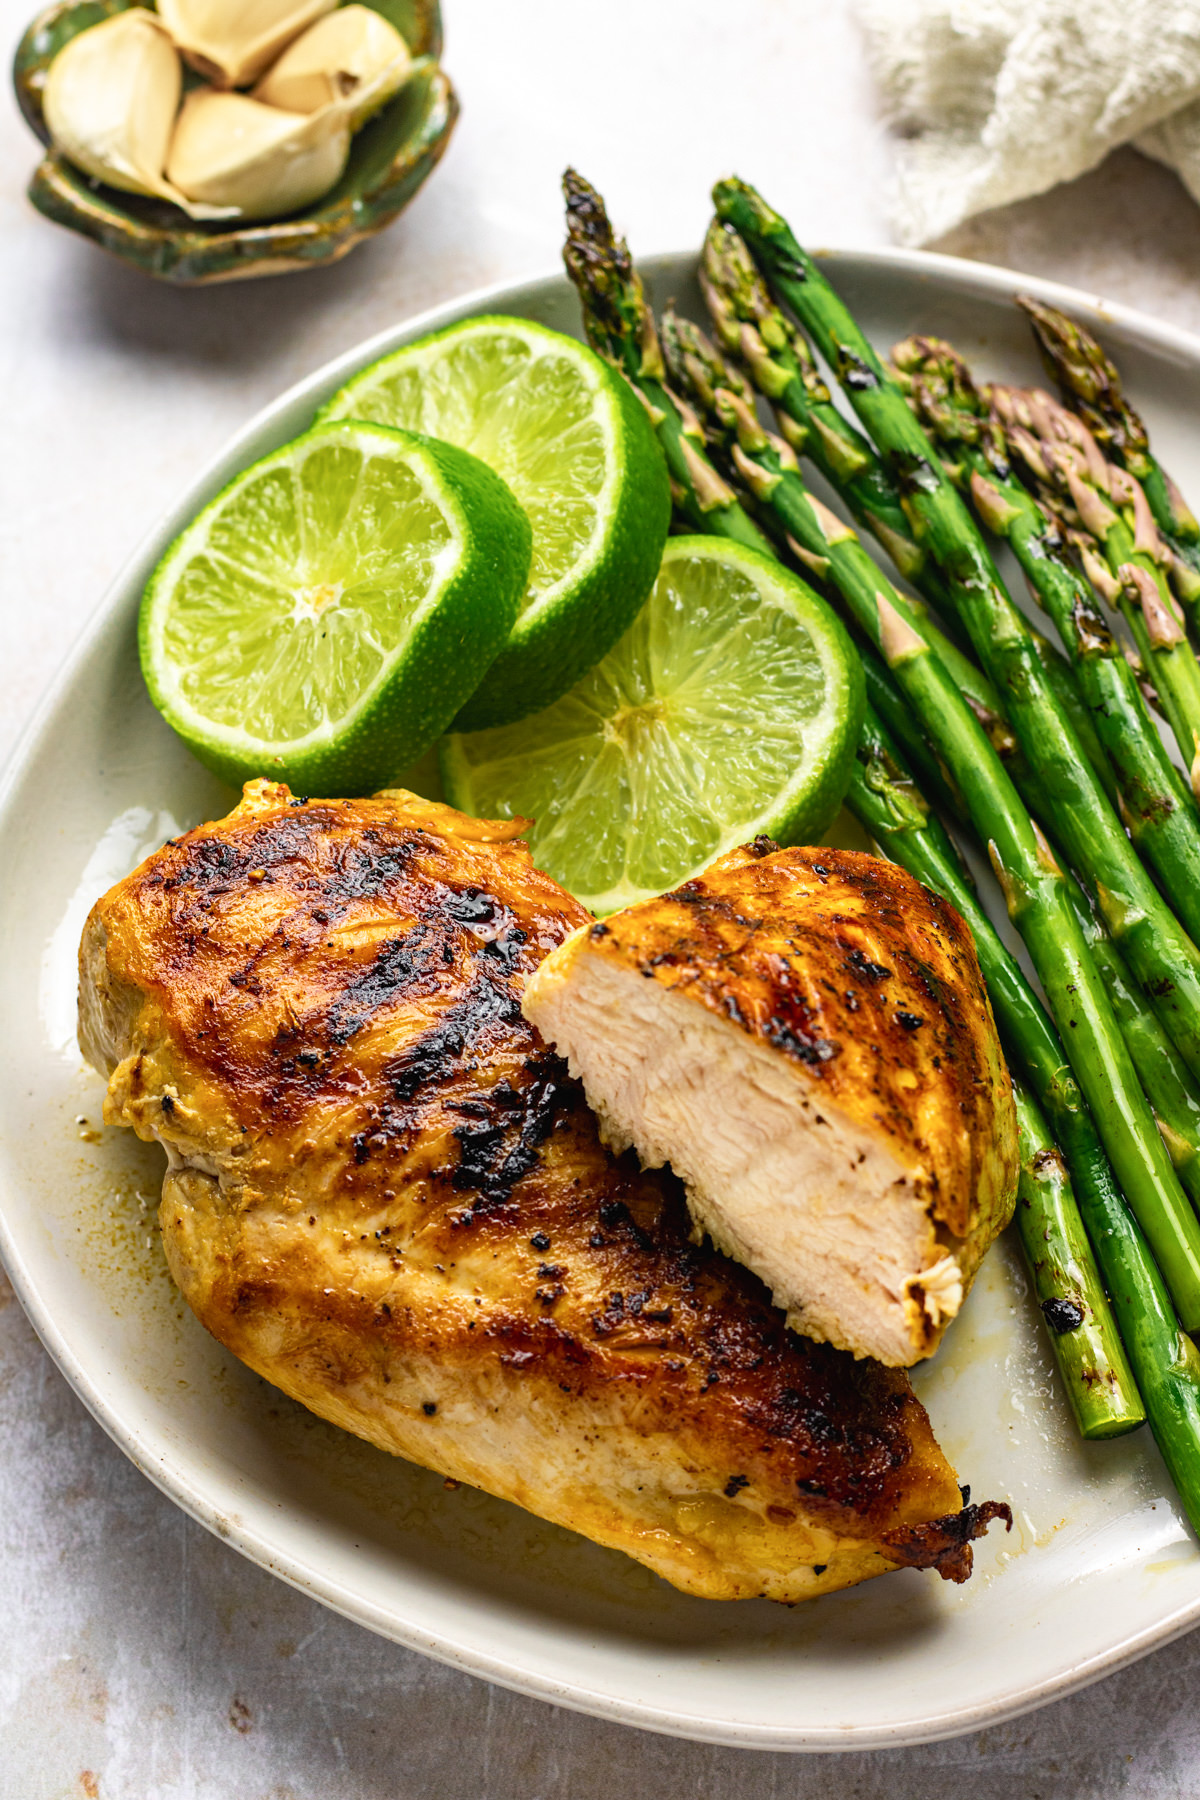 Grilled ginger lime chicken on a plate served asparagus and lime slices